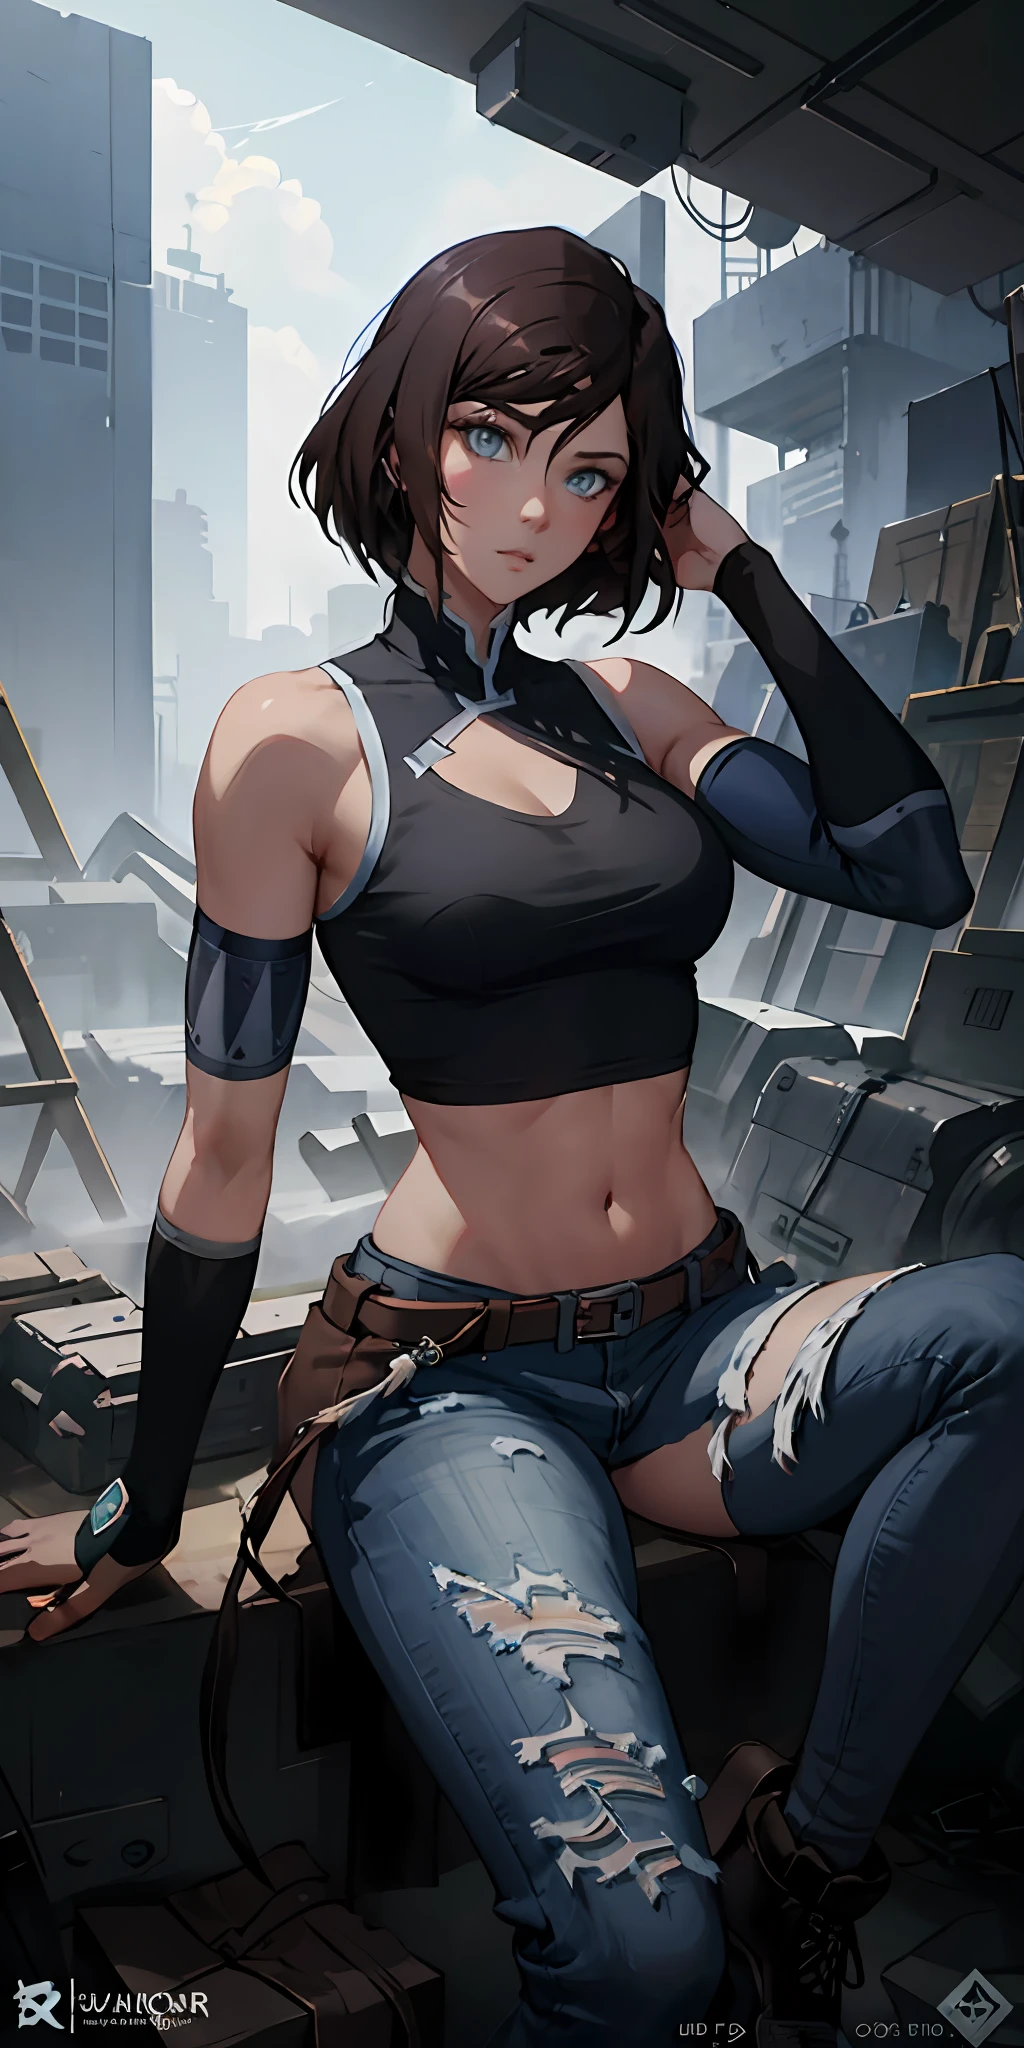 Korra, sitting on some stairs, ripped jeans, tank top, ((pulls up her shirt)) , slightly muscular, Beautiful anime waifu style girl, hyperdetailed painting, luminism, art by Carne Griffiths and Wadim Kashin concept art,  post-apocalyptic background, abstract beauty, approaching perfection, pure form, golden ratio, minimalistic, dark atmosphere, unfinished, concept art, intricate details, 8k post production, high resolution, hyperdetailed, trending on artstation, sharp focus, studio photo, intricate details, highly detailed, by Jon Bauer